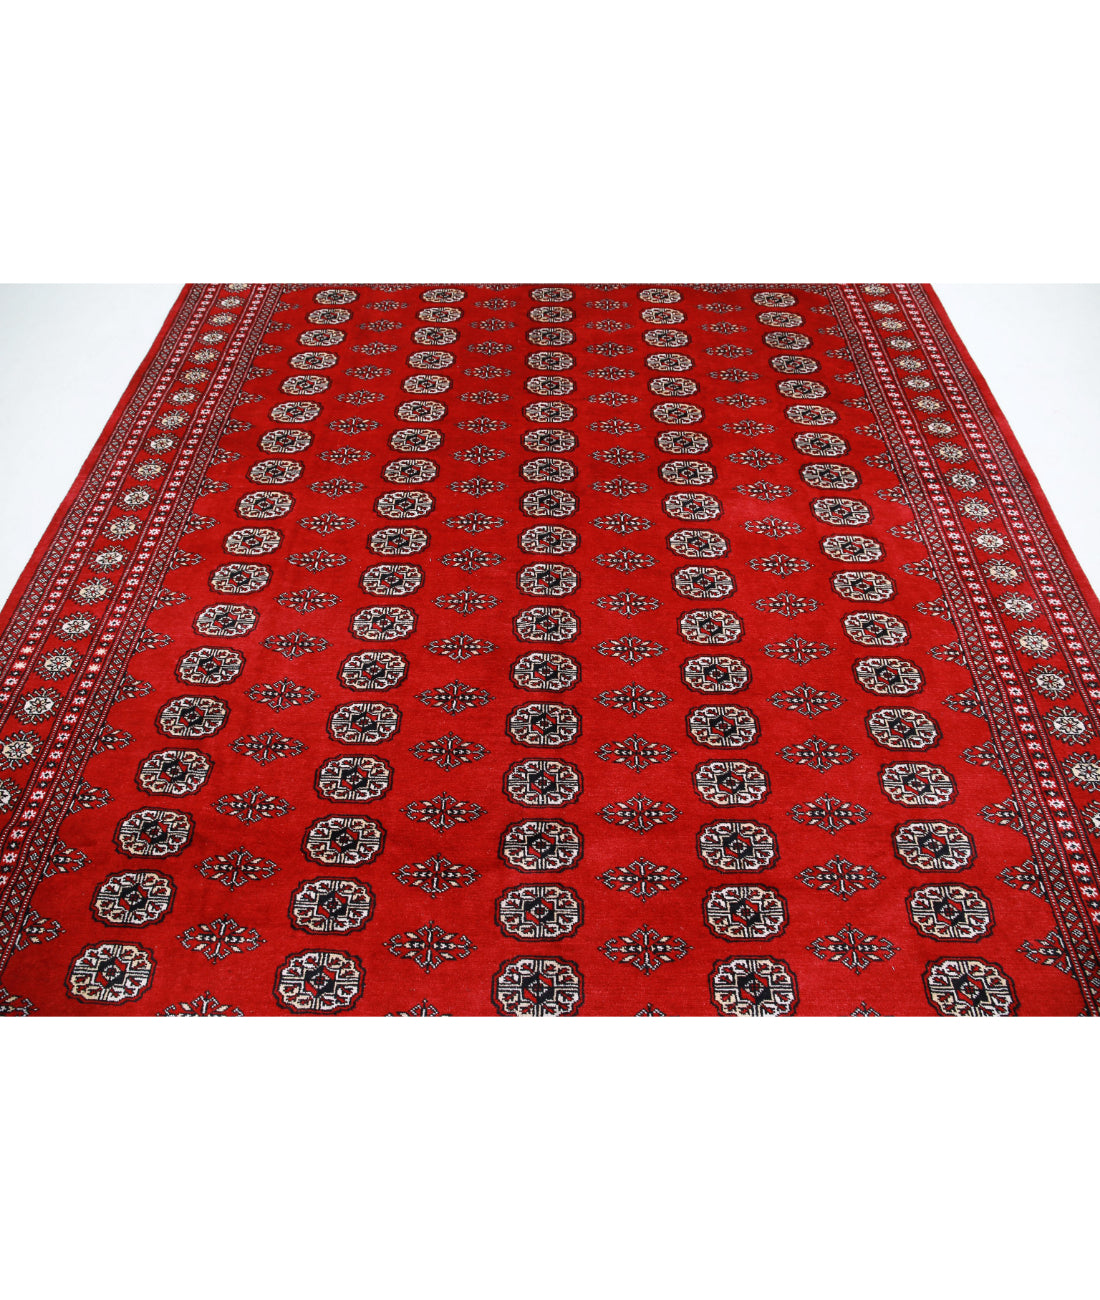 Hand Knotted Tribal Bokhara Wool Rug - 7'10'' x 9'11'' 7'10'' x 9'11'' (235 X 298) / Red / Beige